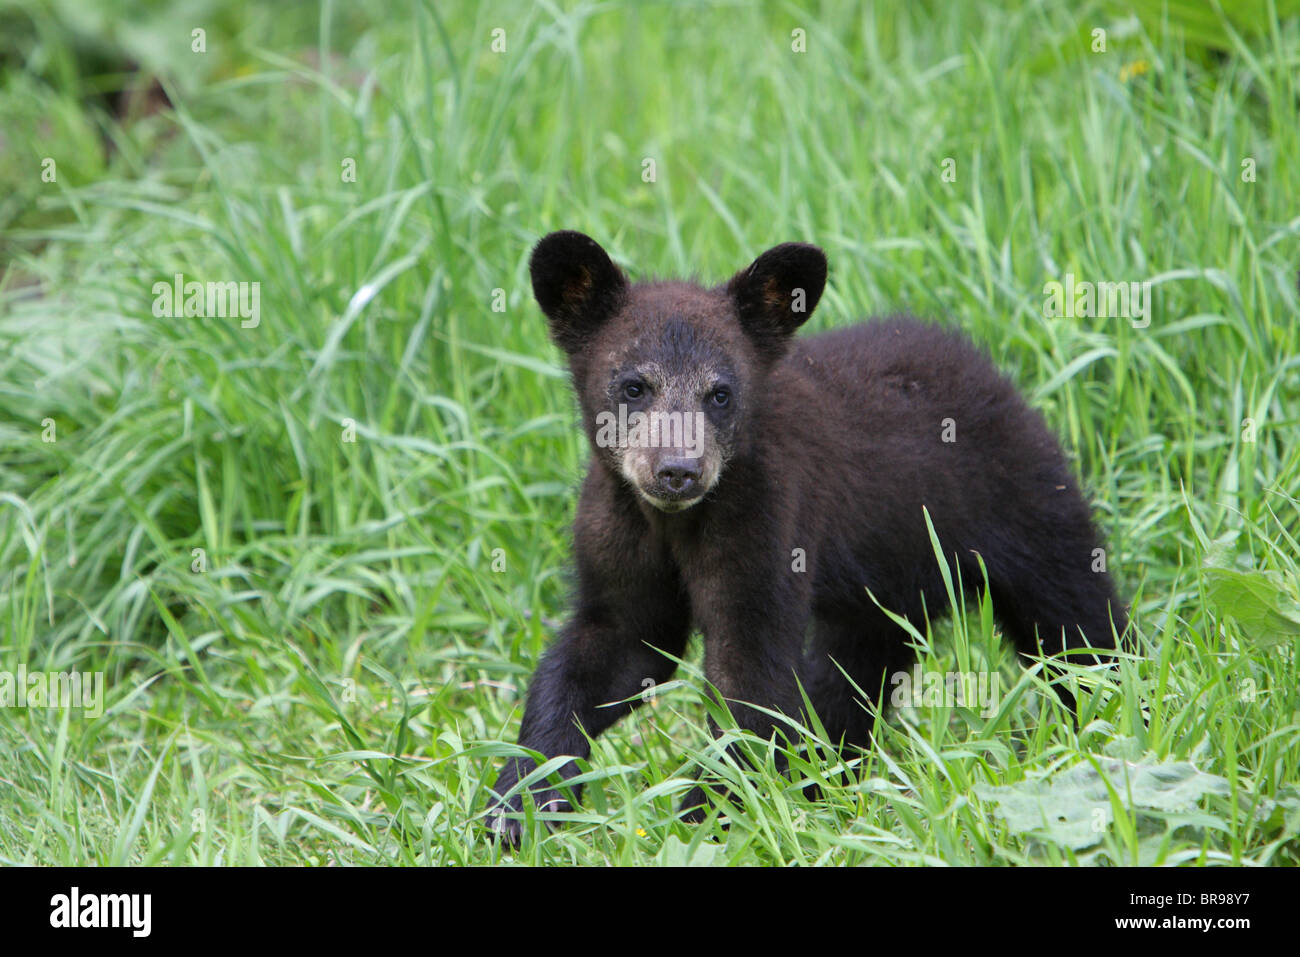 Black Bear Ursus americanus small cub walking through long grass on the edge of a forest Stock Photo